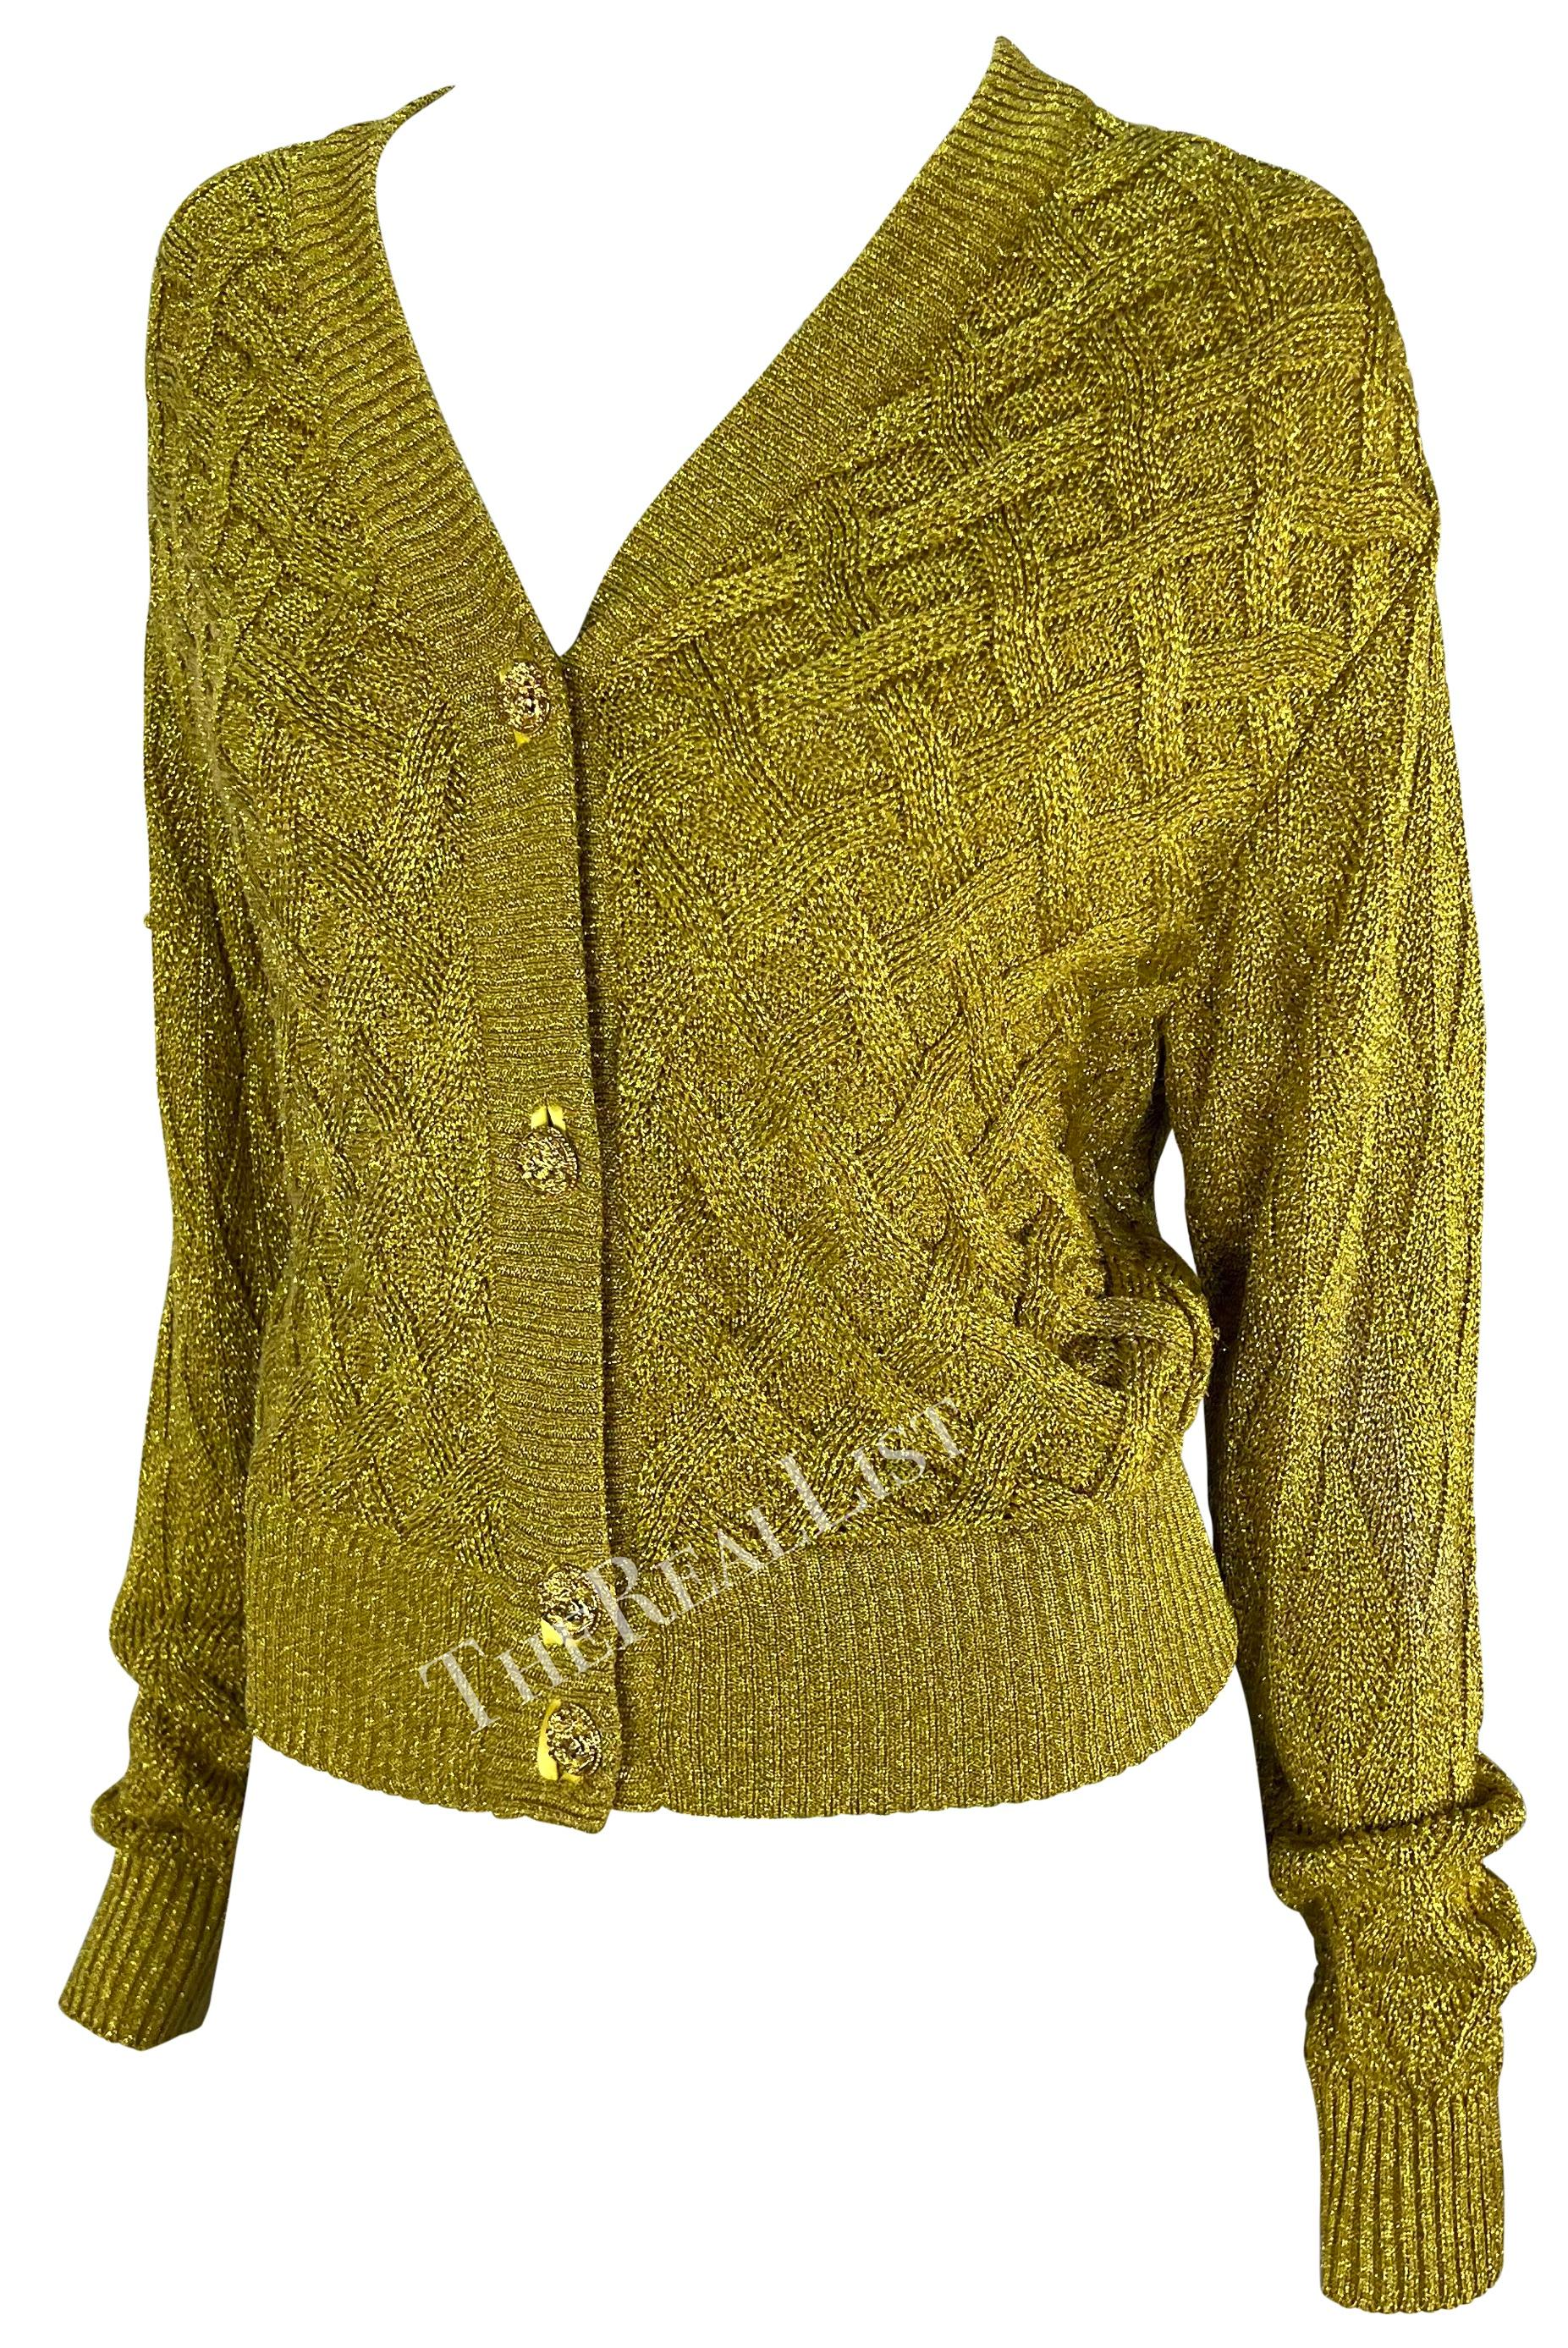 Presenting a gold cable knit Atelier Versace cardigan sweater, designed by Gianni Versace. From the Fall/Winter 1992 collection, this gold metallic knit sweater features a v-neckline and button-down closure adorned with gold-tone mask buttons.